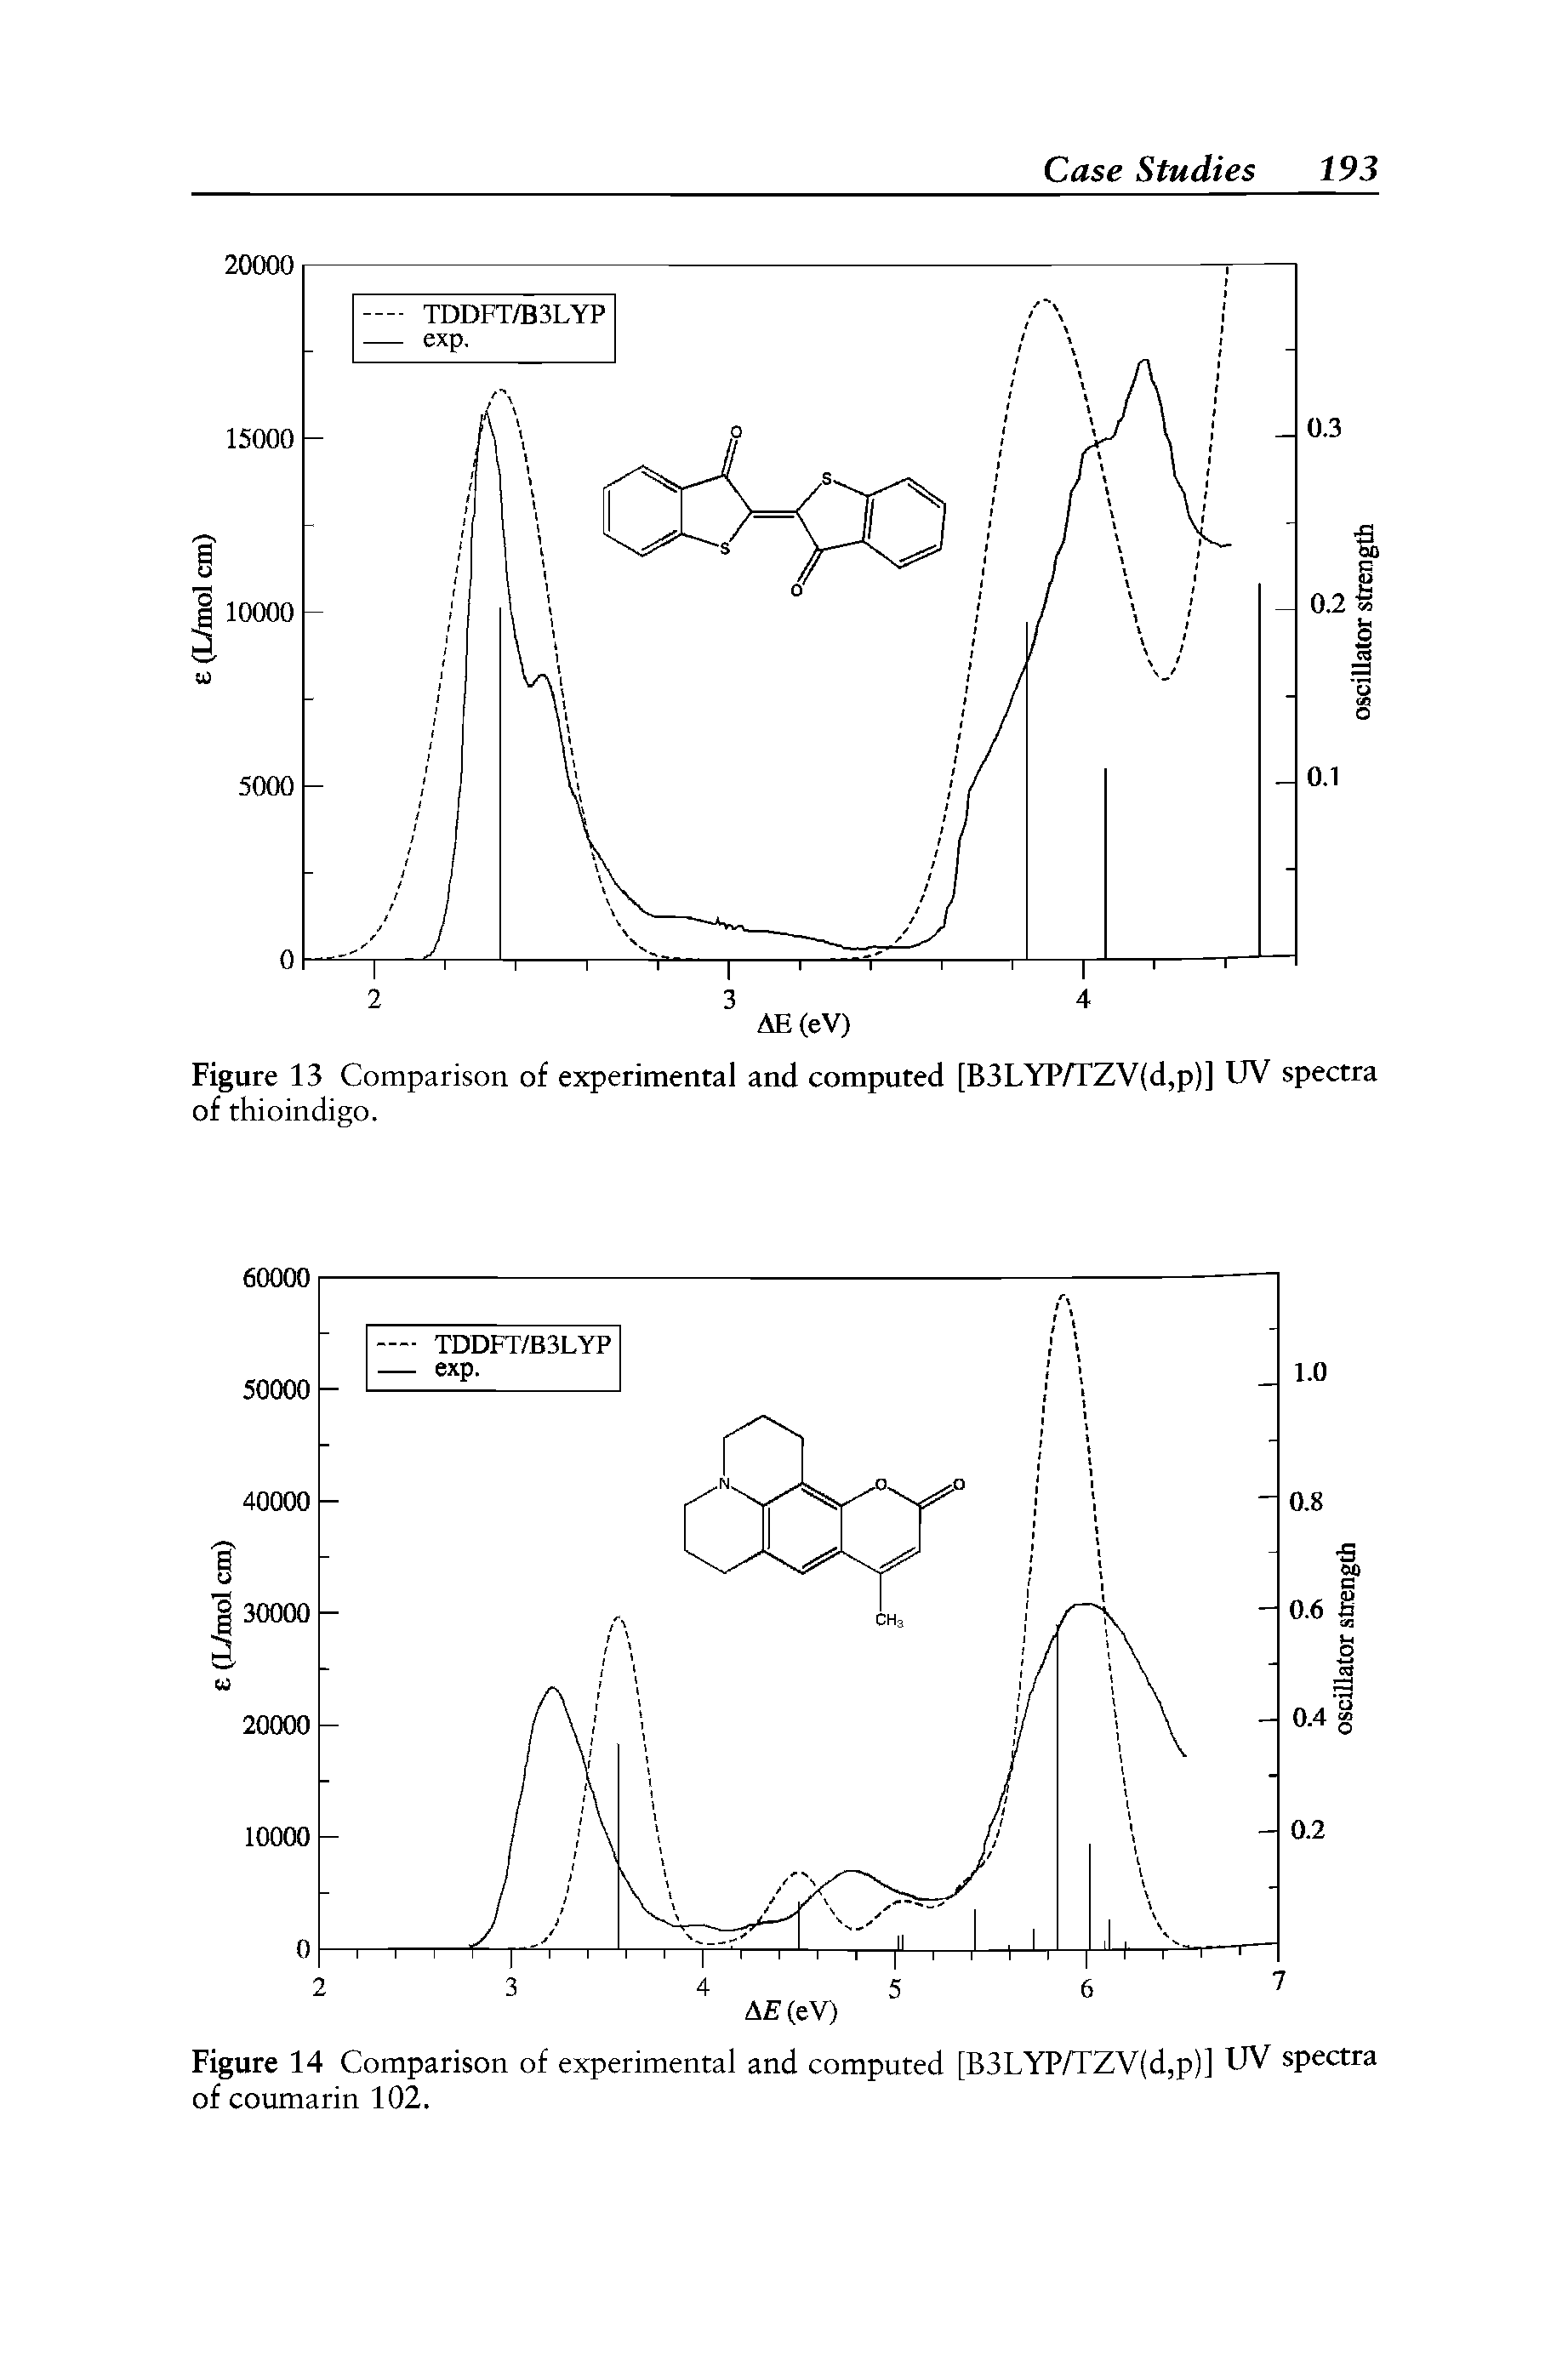 Figure 13 Comparison of experimental and computed [B3LYP/TZV(d,p)] UV spectra of thioindigo.